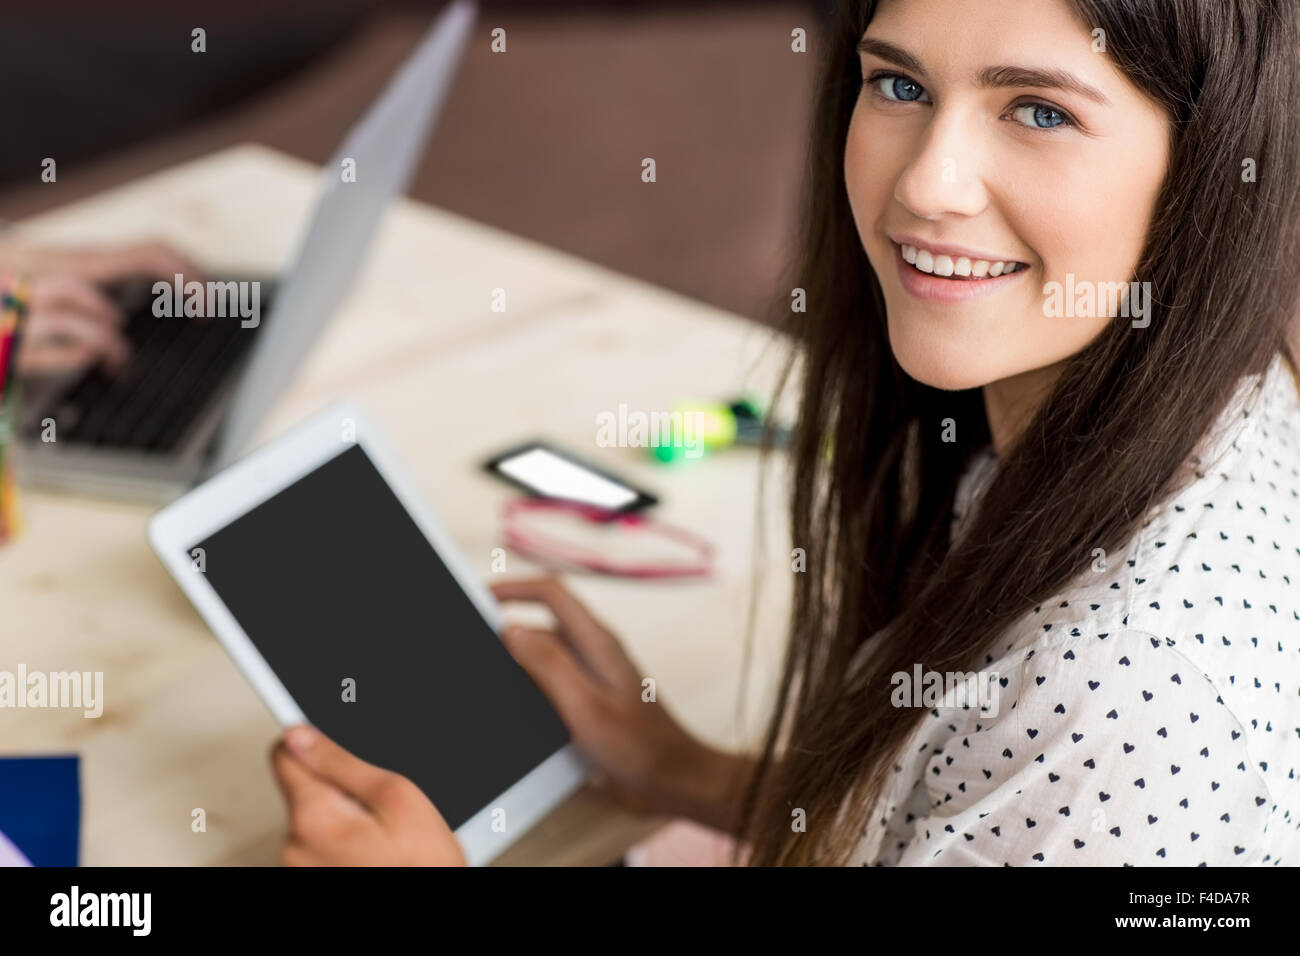 Student using tablet working on assignment Stock Photo